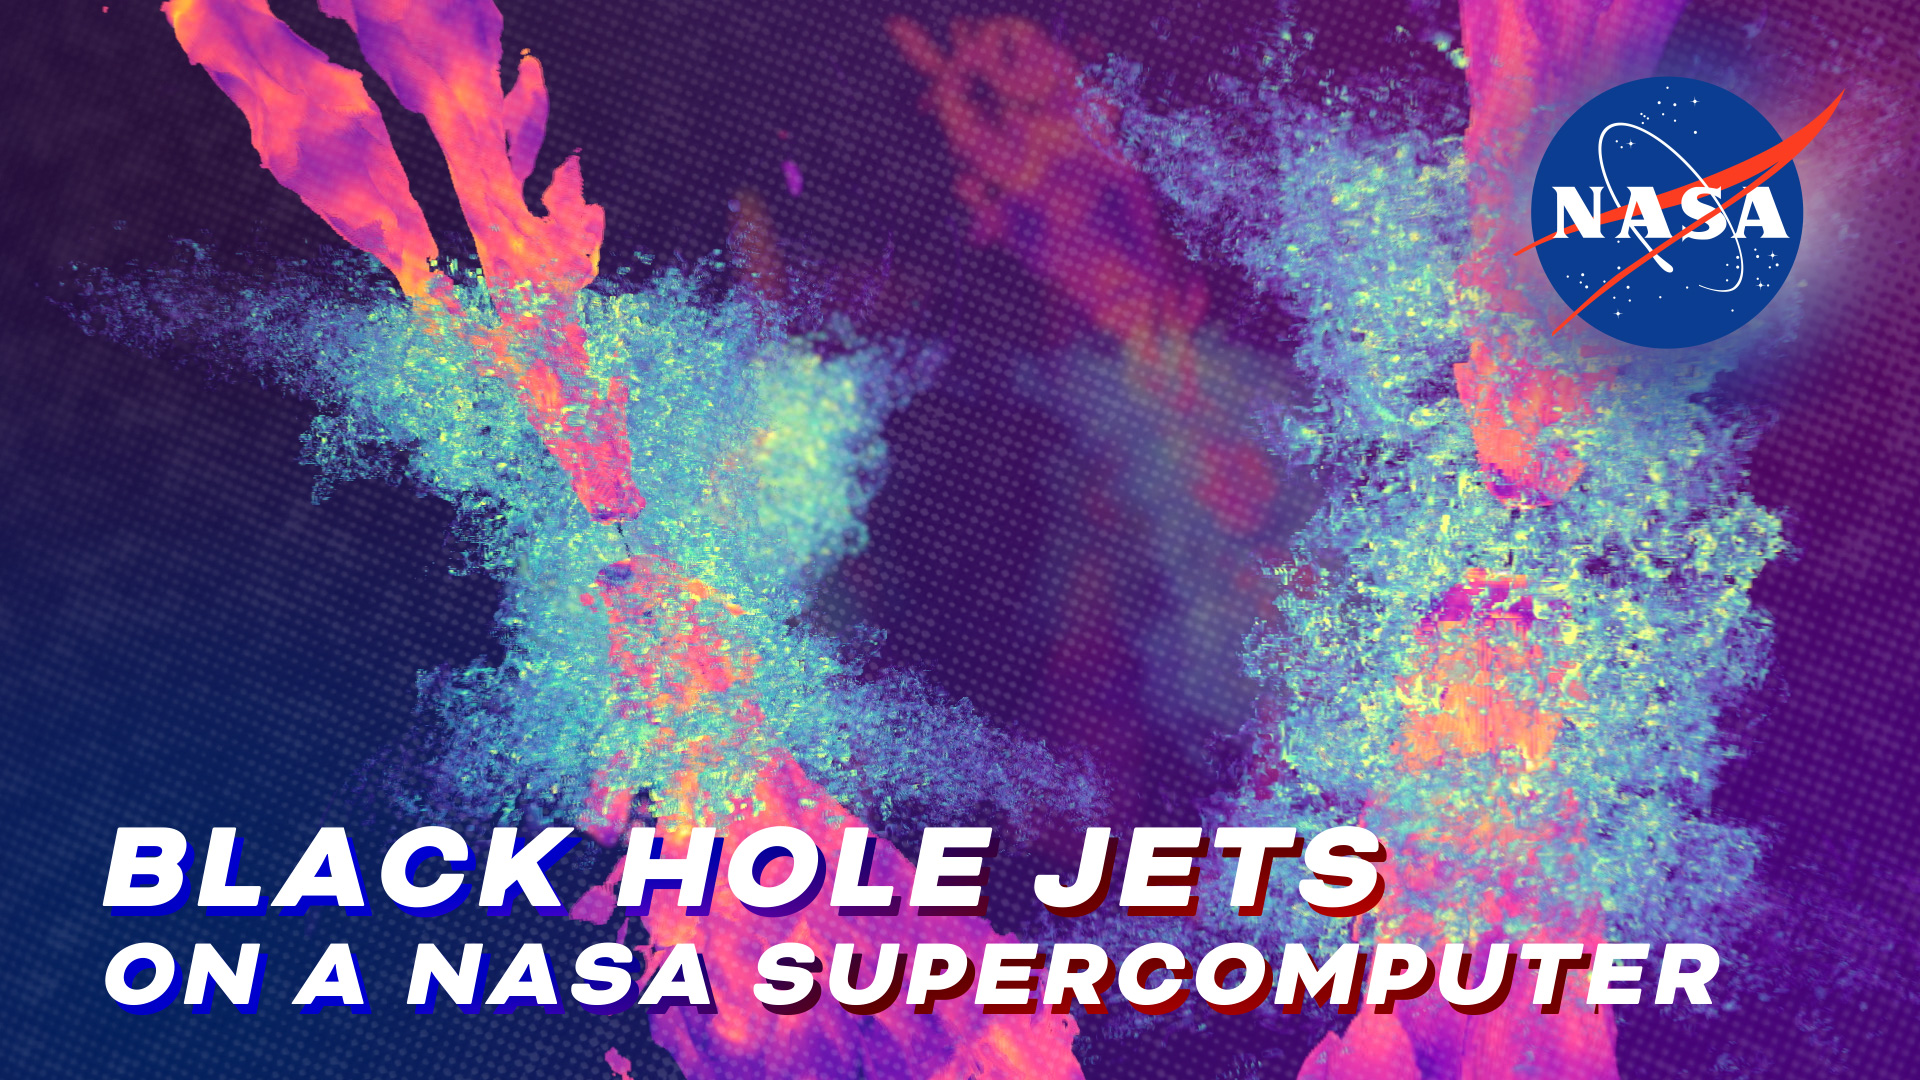 Preview Image for Creating Black Hole Jets With a NASA Supercomputer